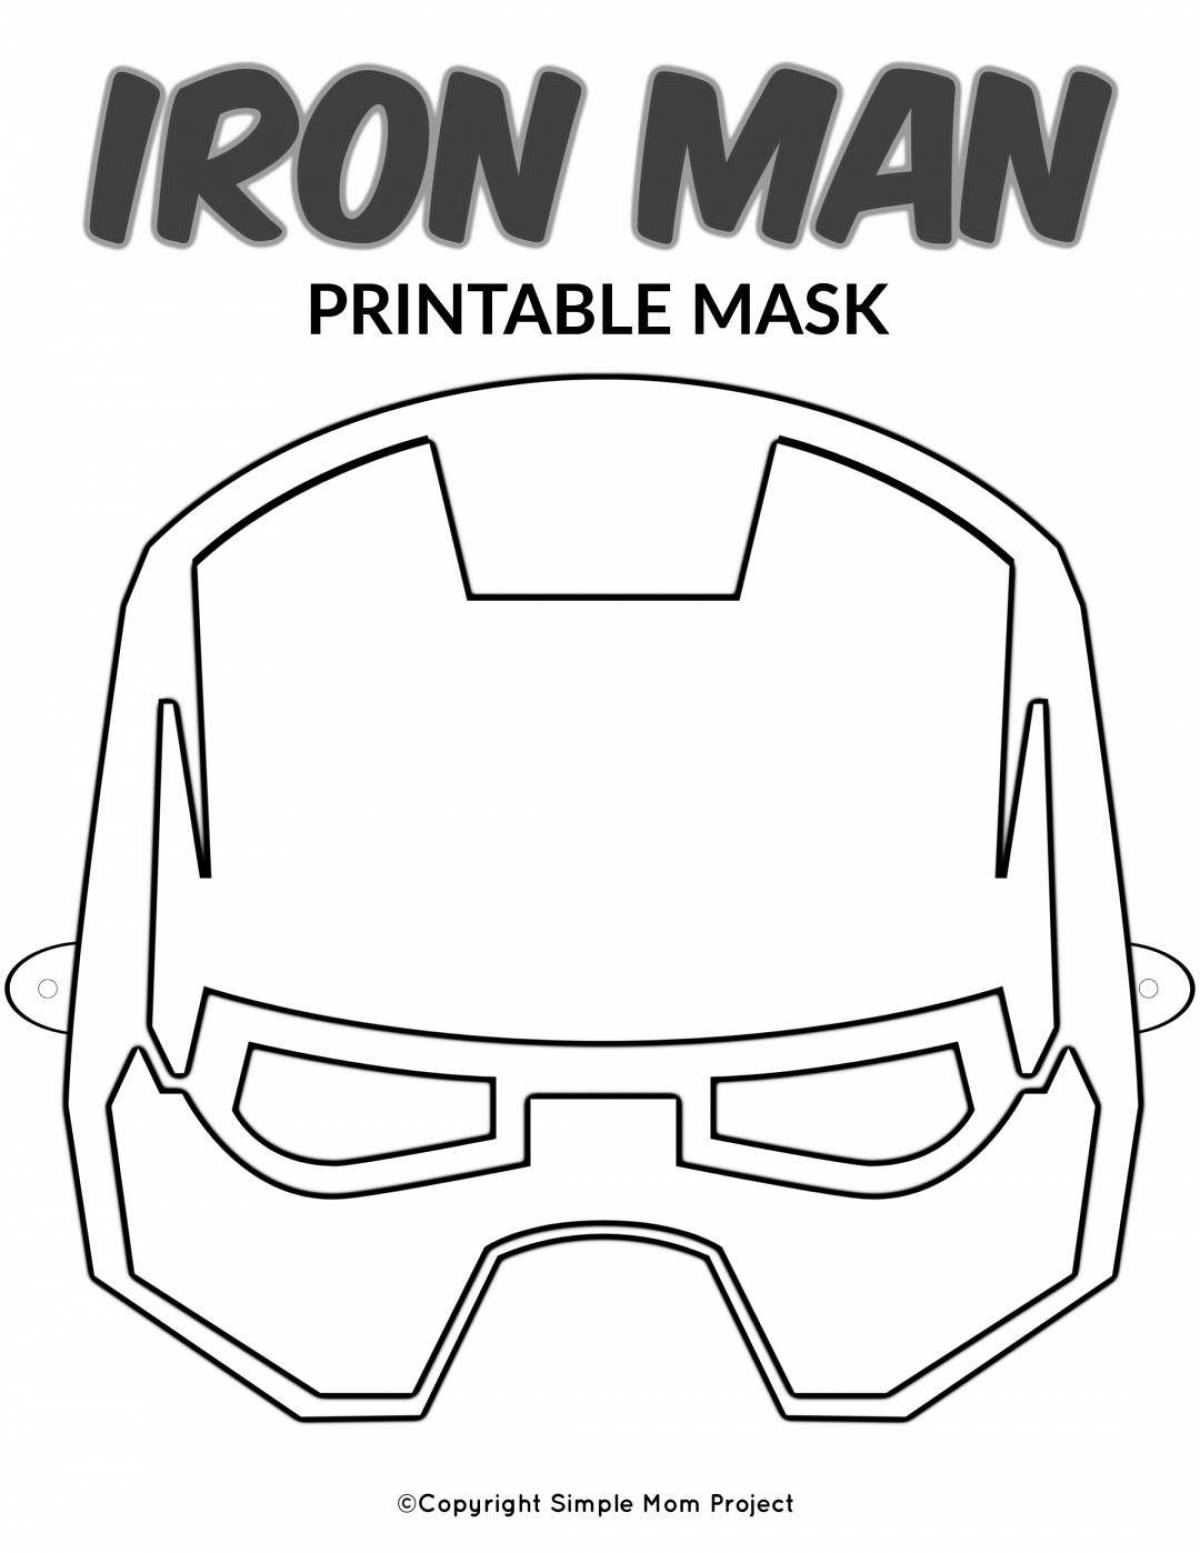 Iron man's dazzling mask coloring book